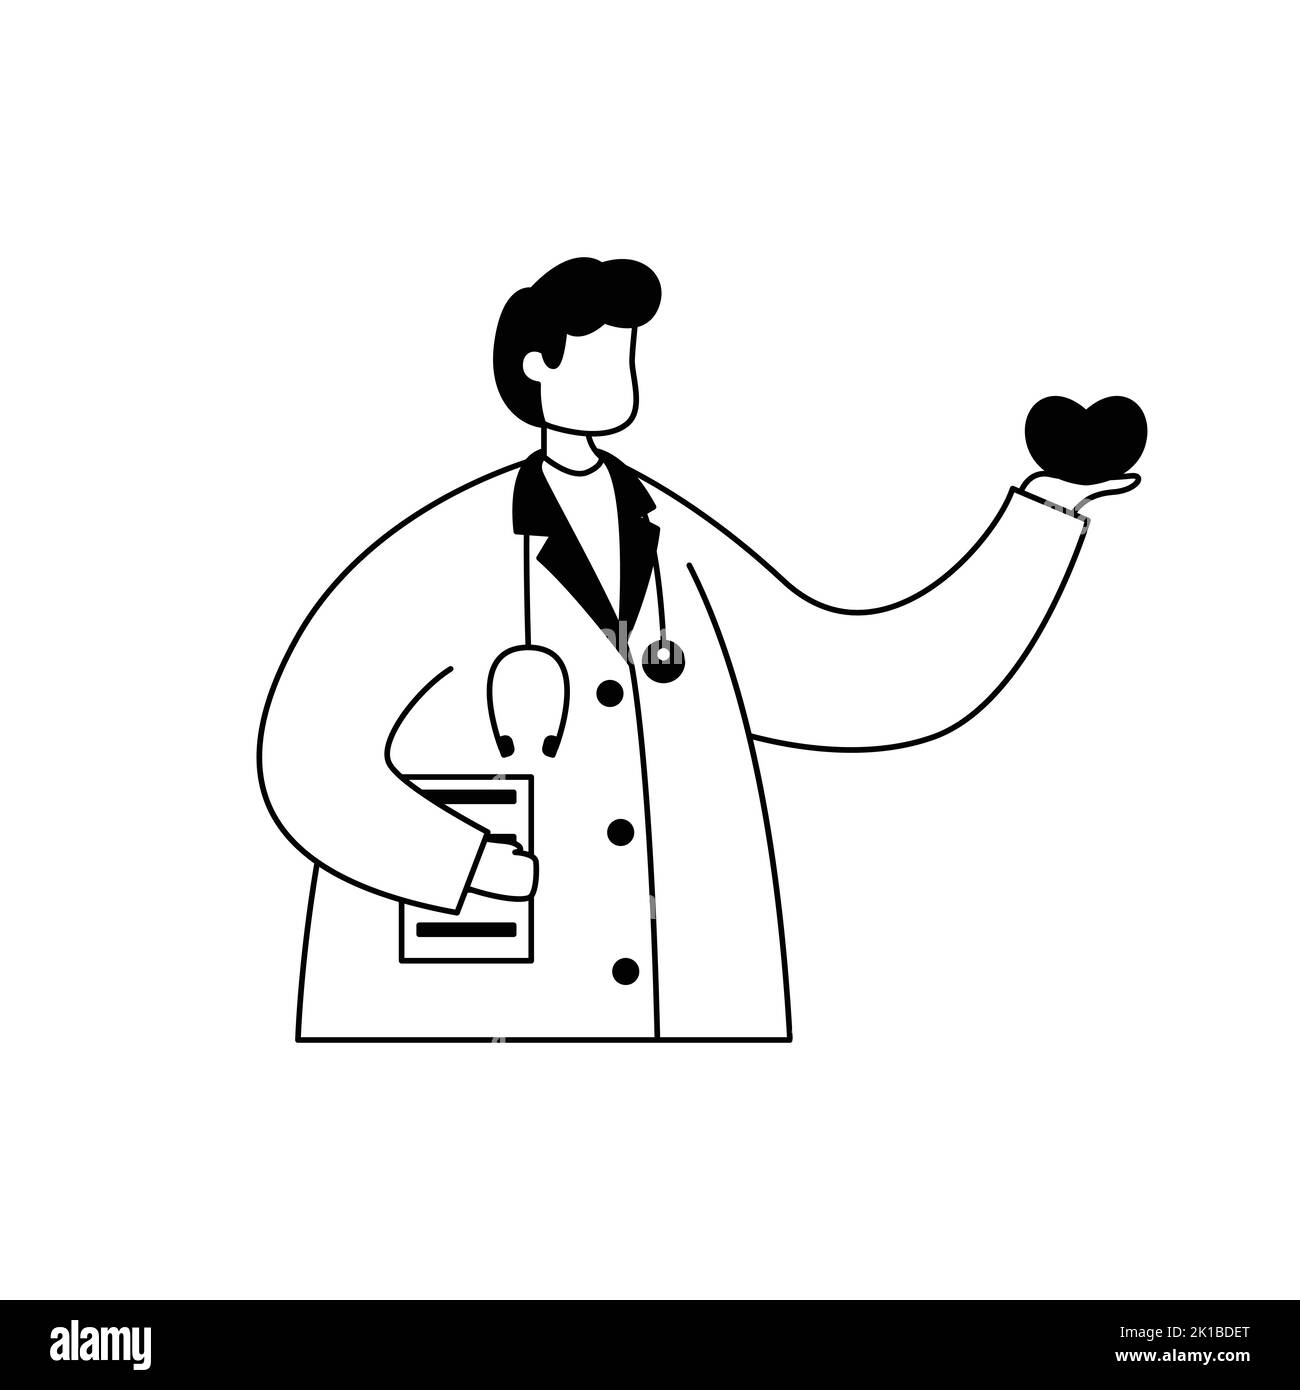 Vector illustration of a cardiologist in a white coat with a heart in his hands. Profession. Stock Vector